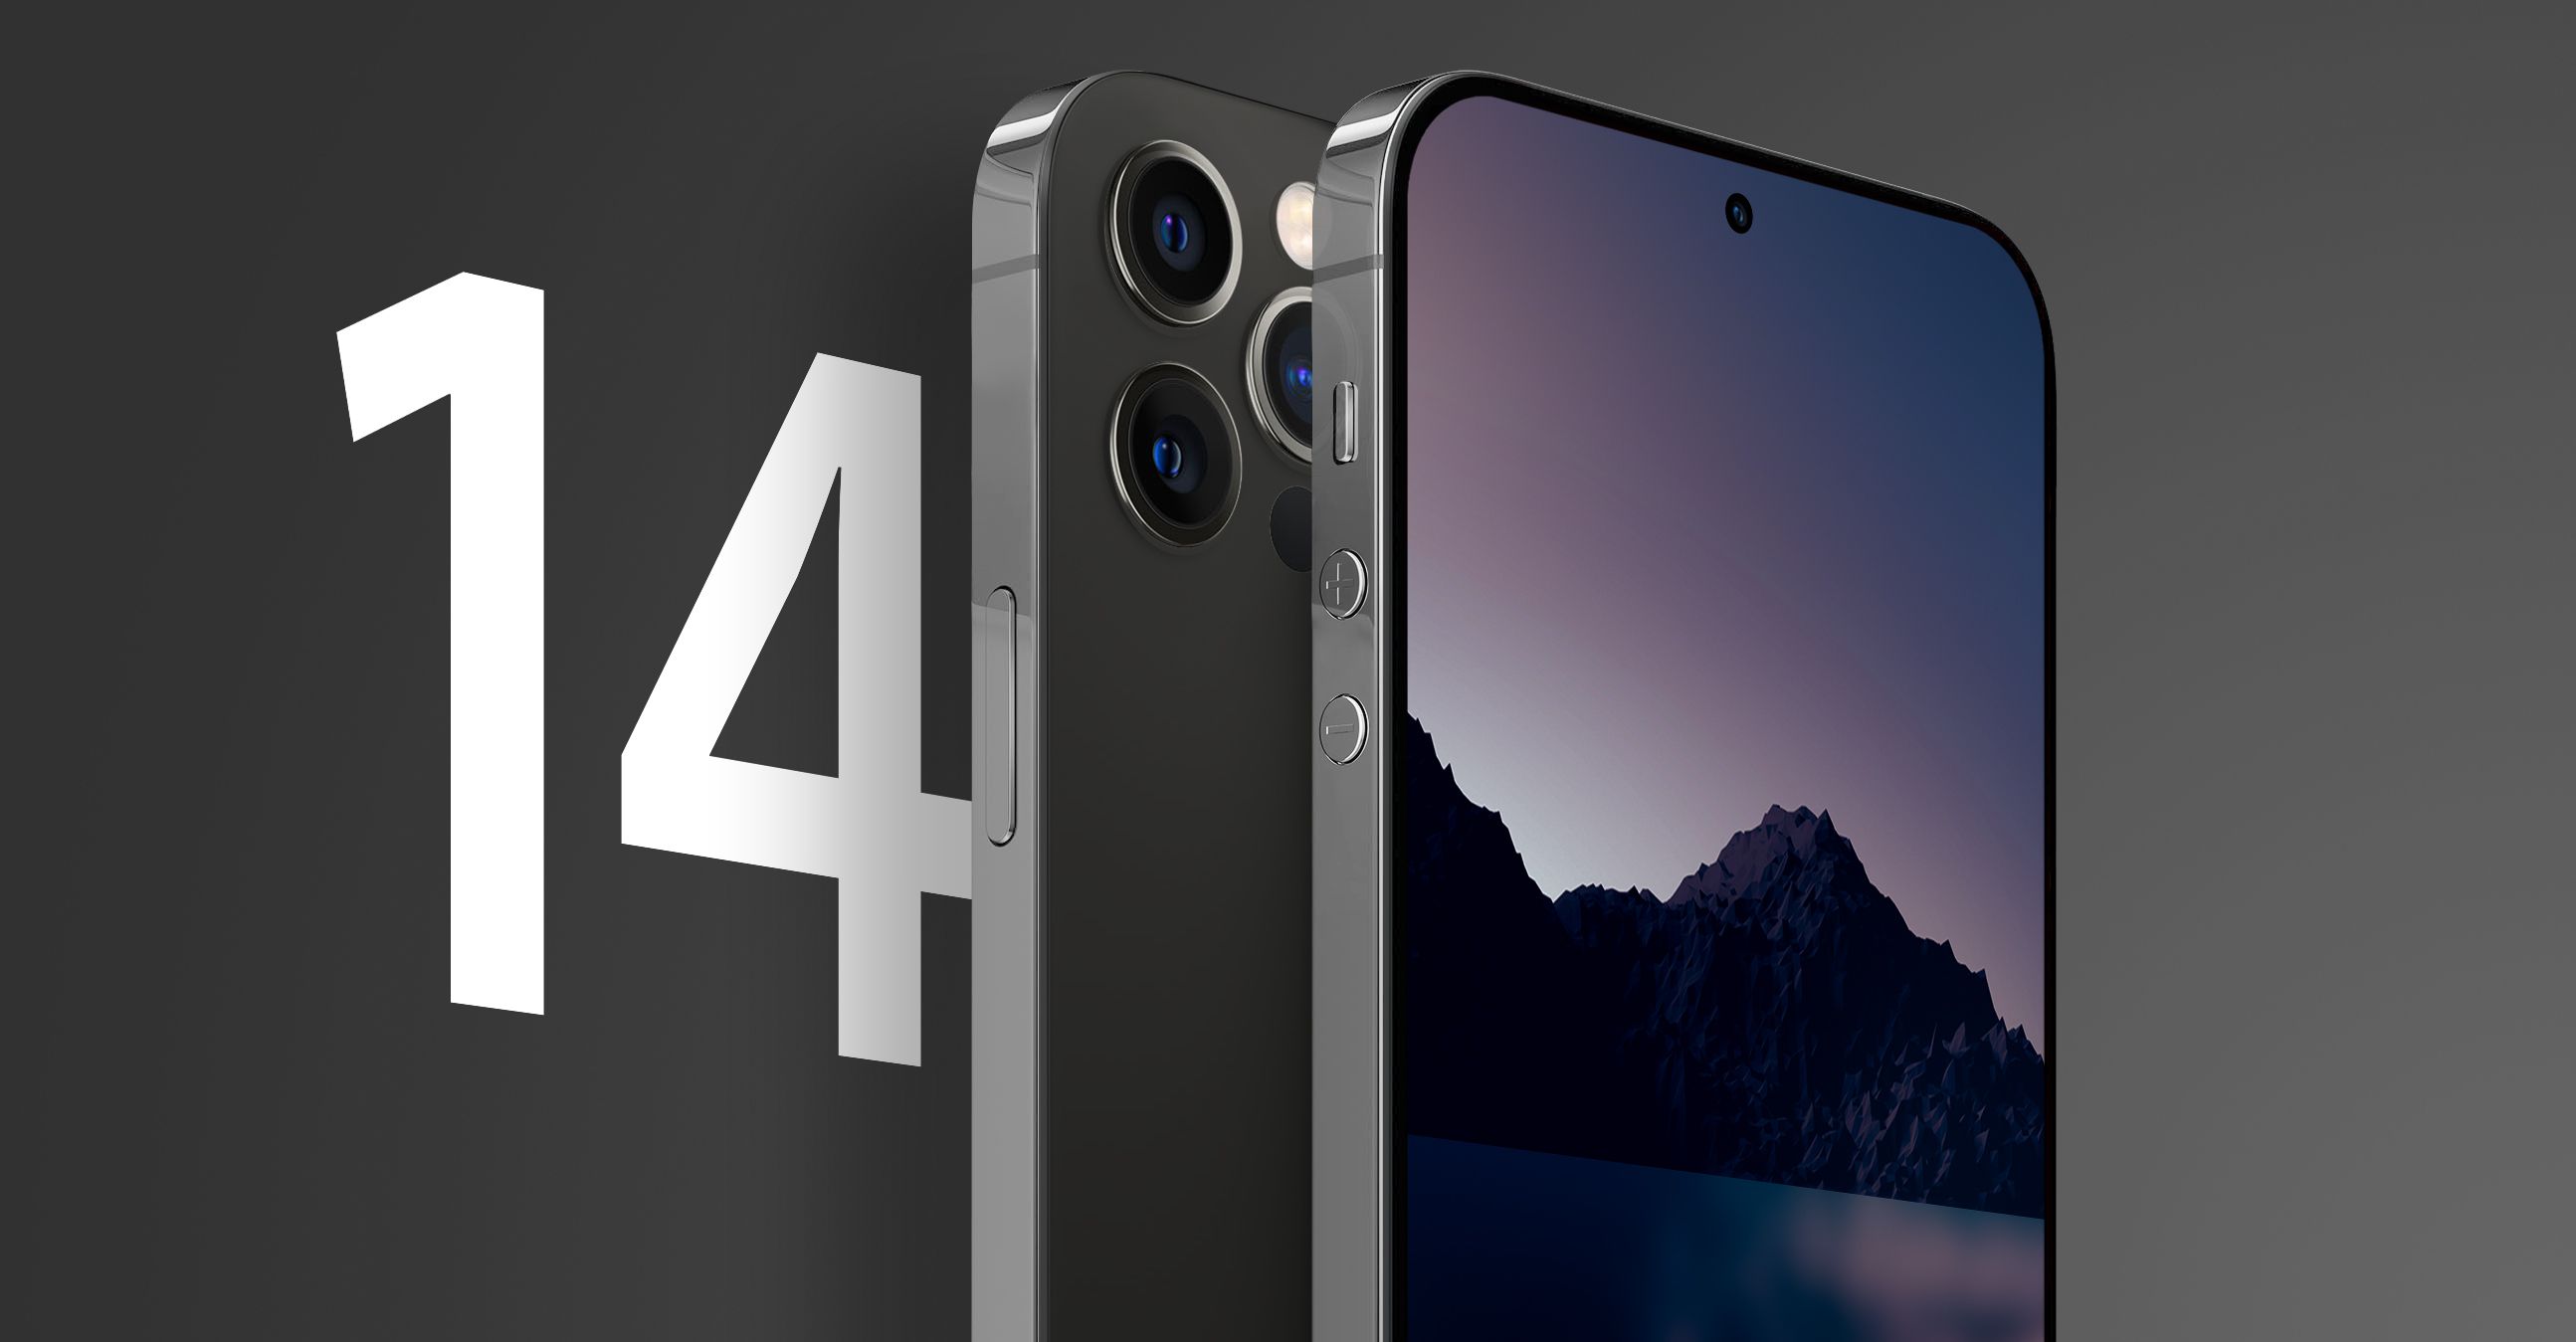 Kuo: iPhone 14 Pro to Feature 48-Megapixel Camera, Periscope Lens Coming 2023